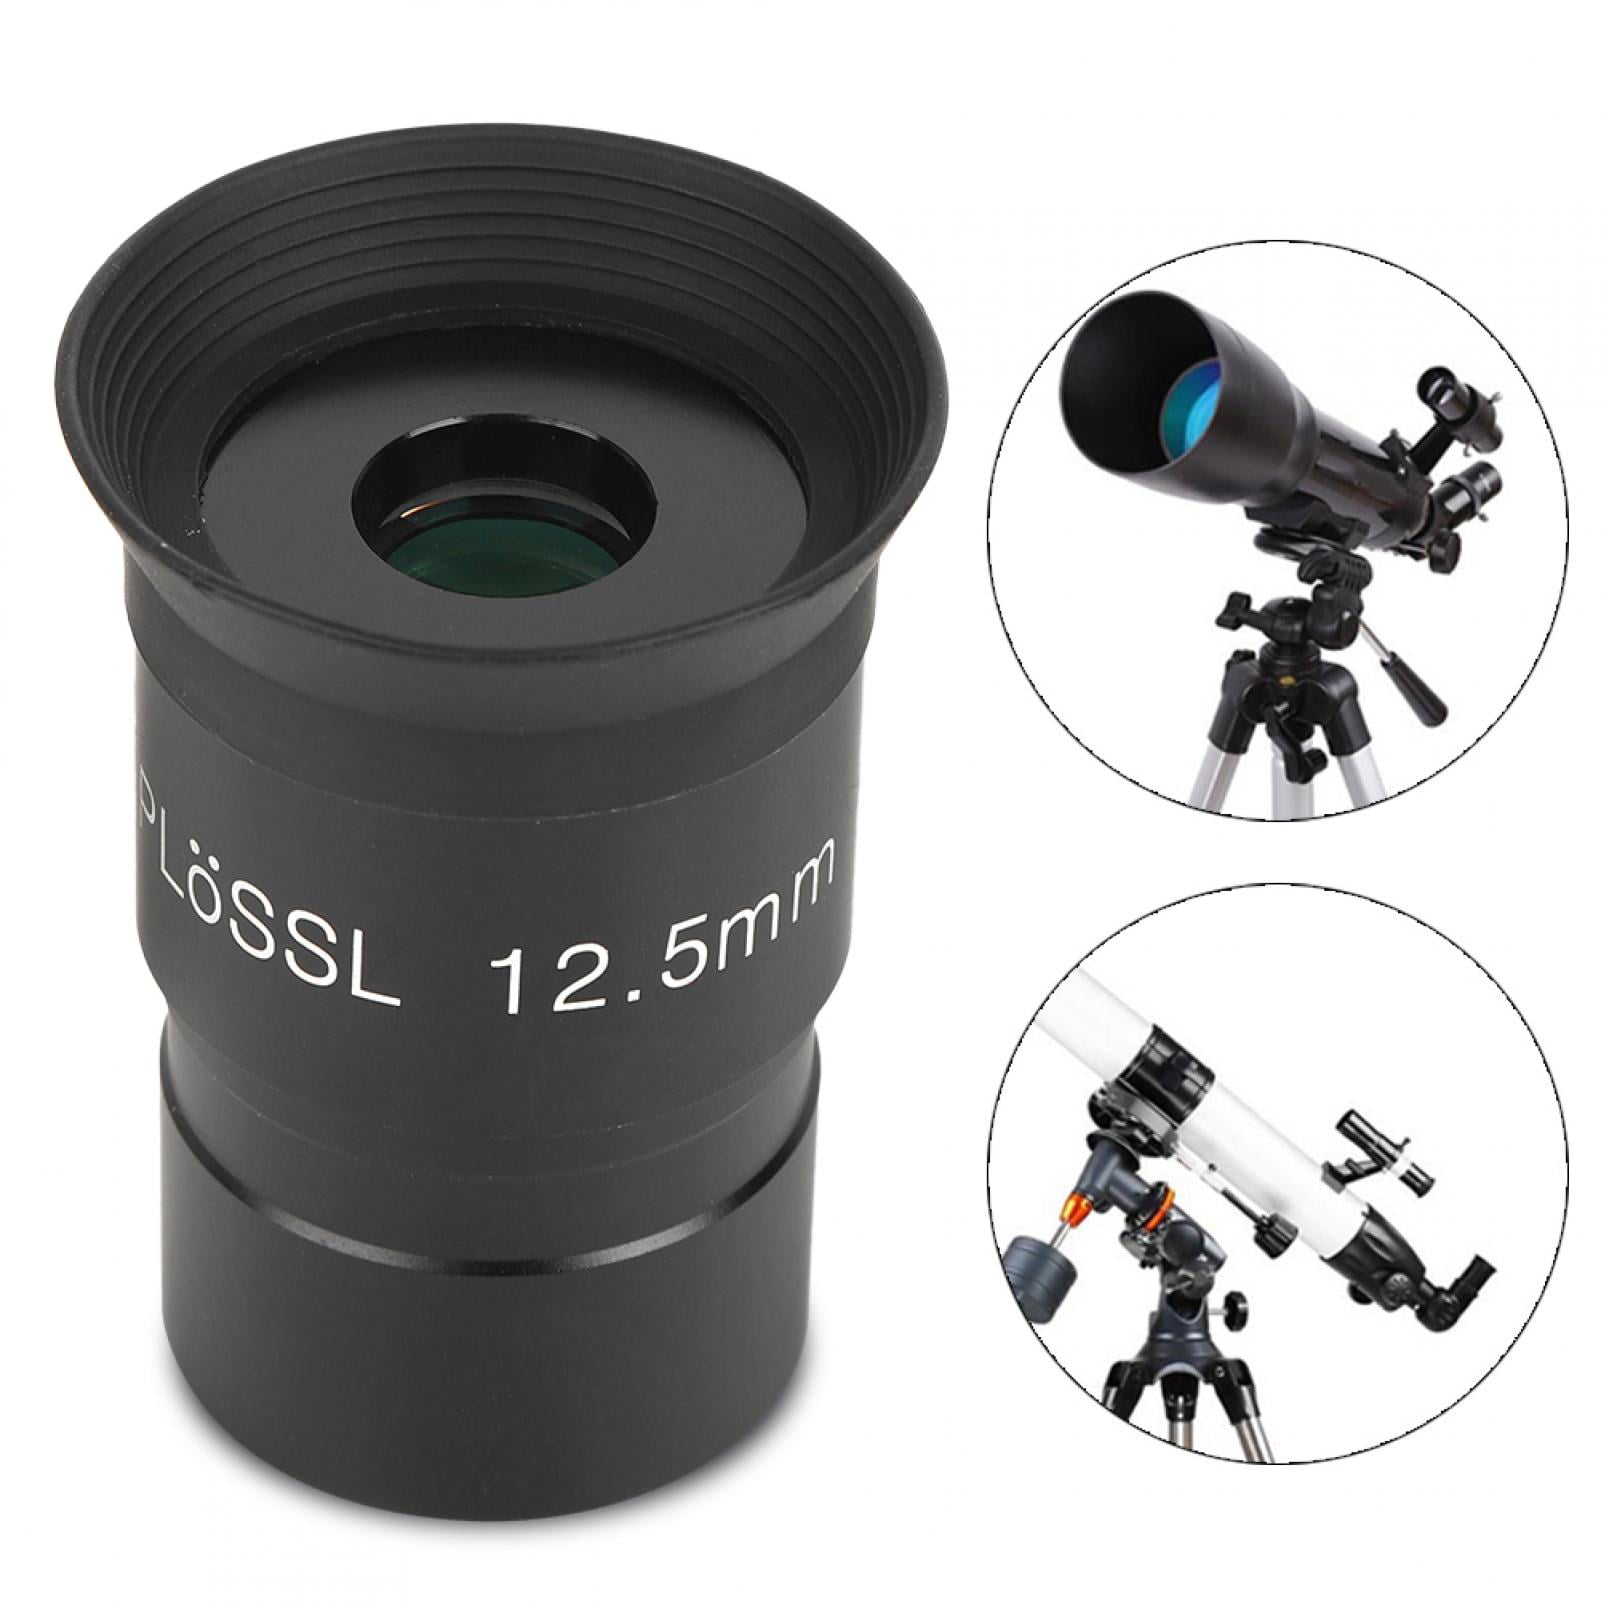 Plossl 12.5mm Long-Focus Eyepiece Multilayer Wideband Coating 1.25inches Metal Monocular Accessory for Astronomical Telescope Plossl Eyepiece 